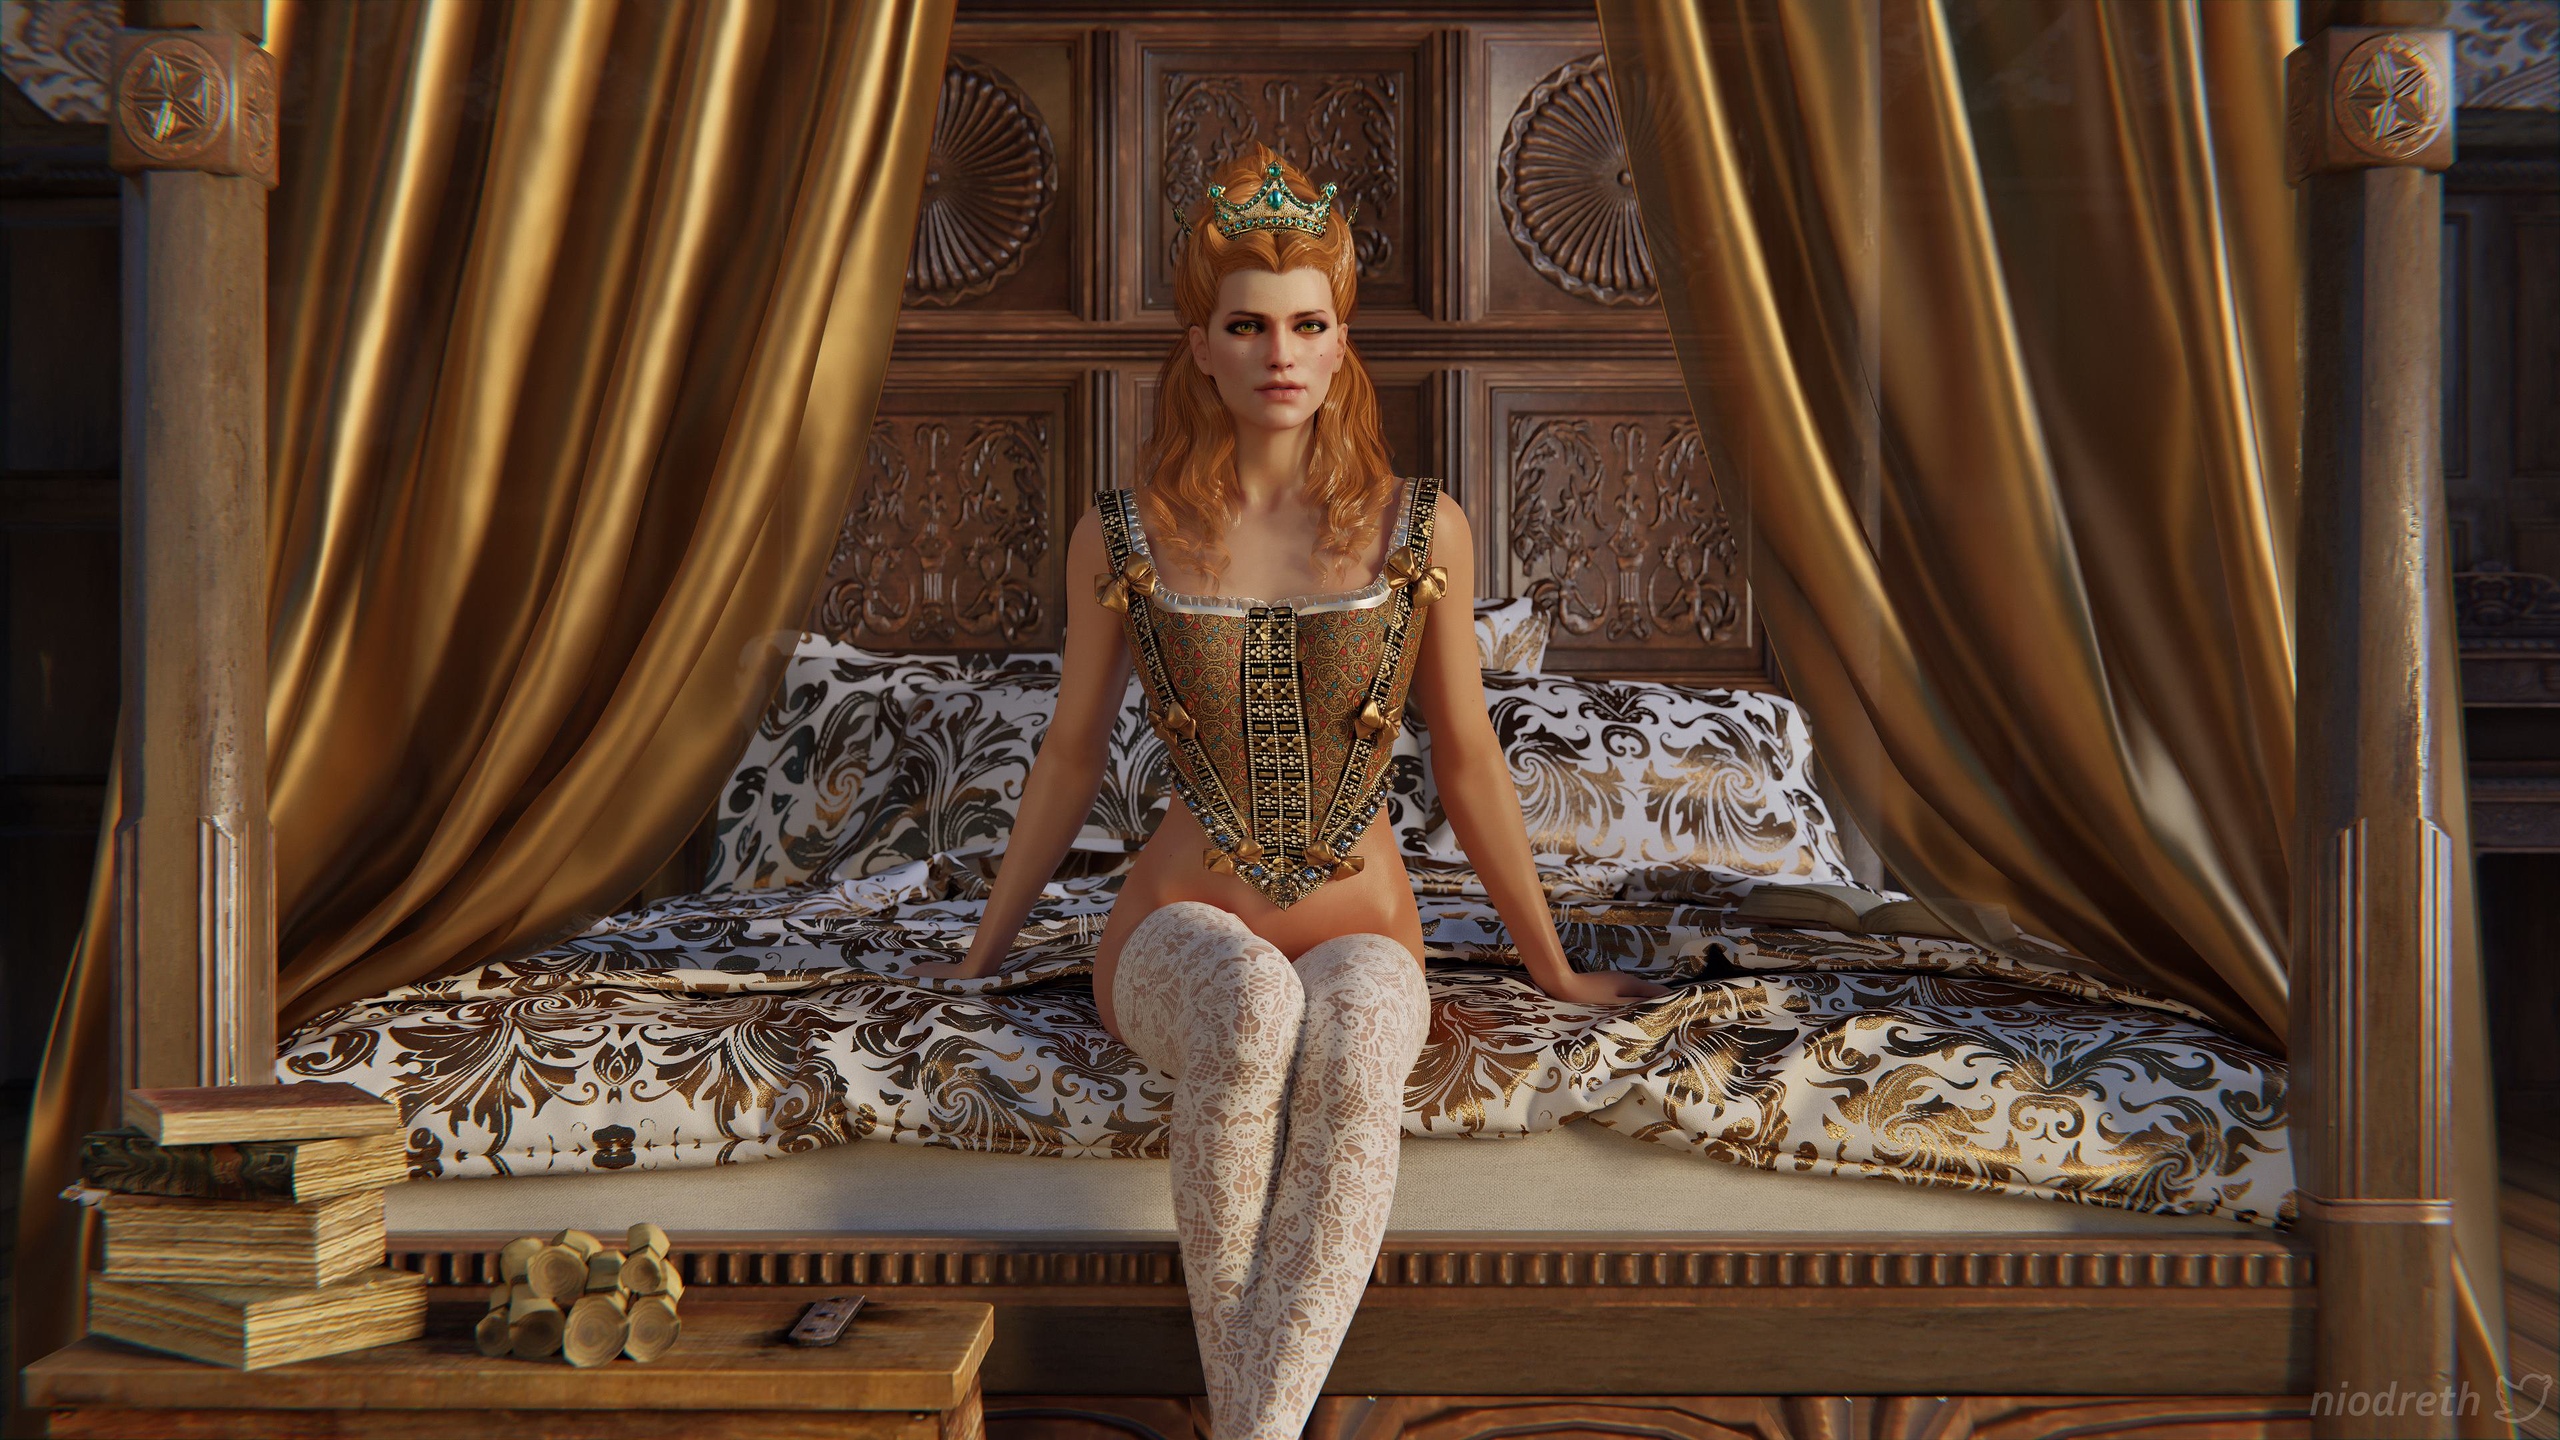 General 2560x1440 The Witcher The Witcher 3: Wild Hunt The Witcher 3: Wild Hunt - Blood and Wine Anna Henrietta bed stockings white stockings crown bedroom queen (royalty) bottomless digital art video games watermarked Niodreth